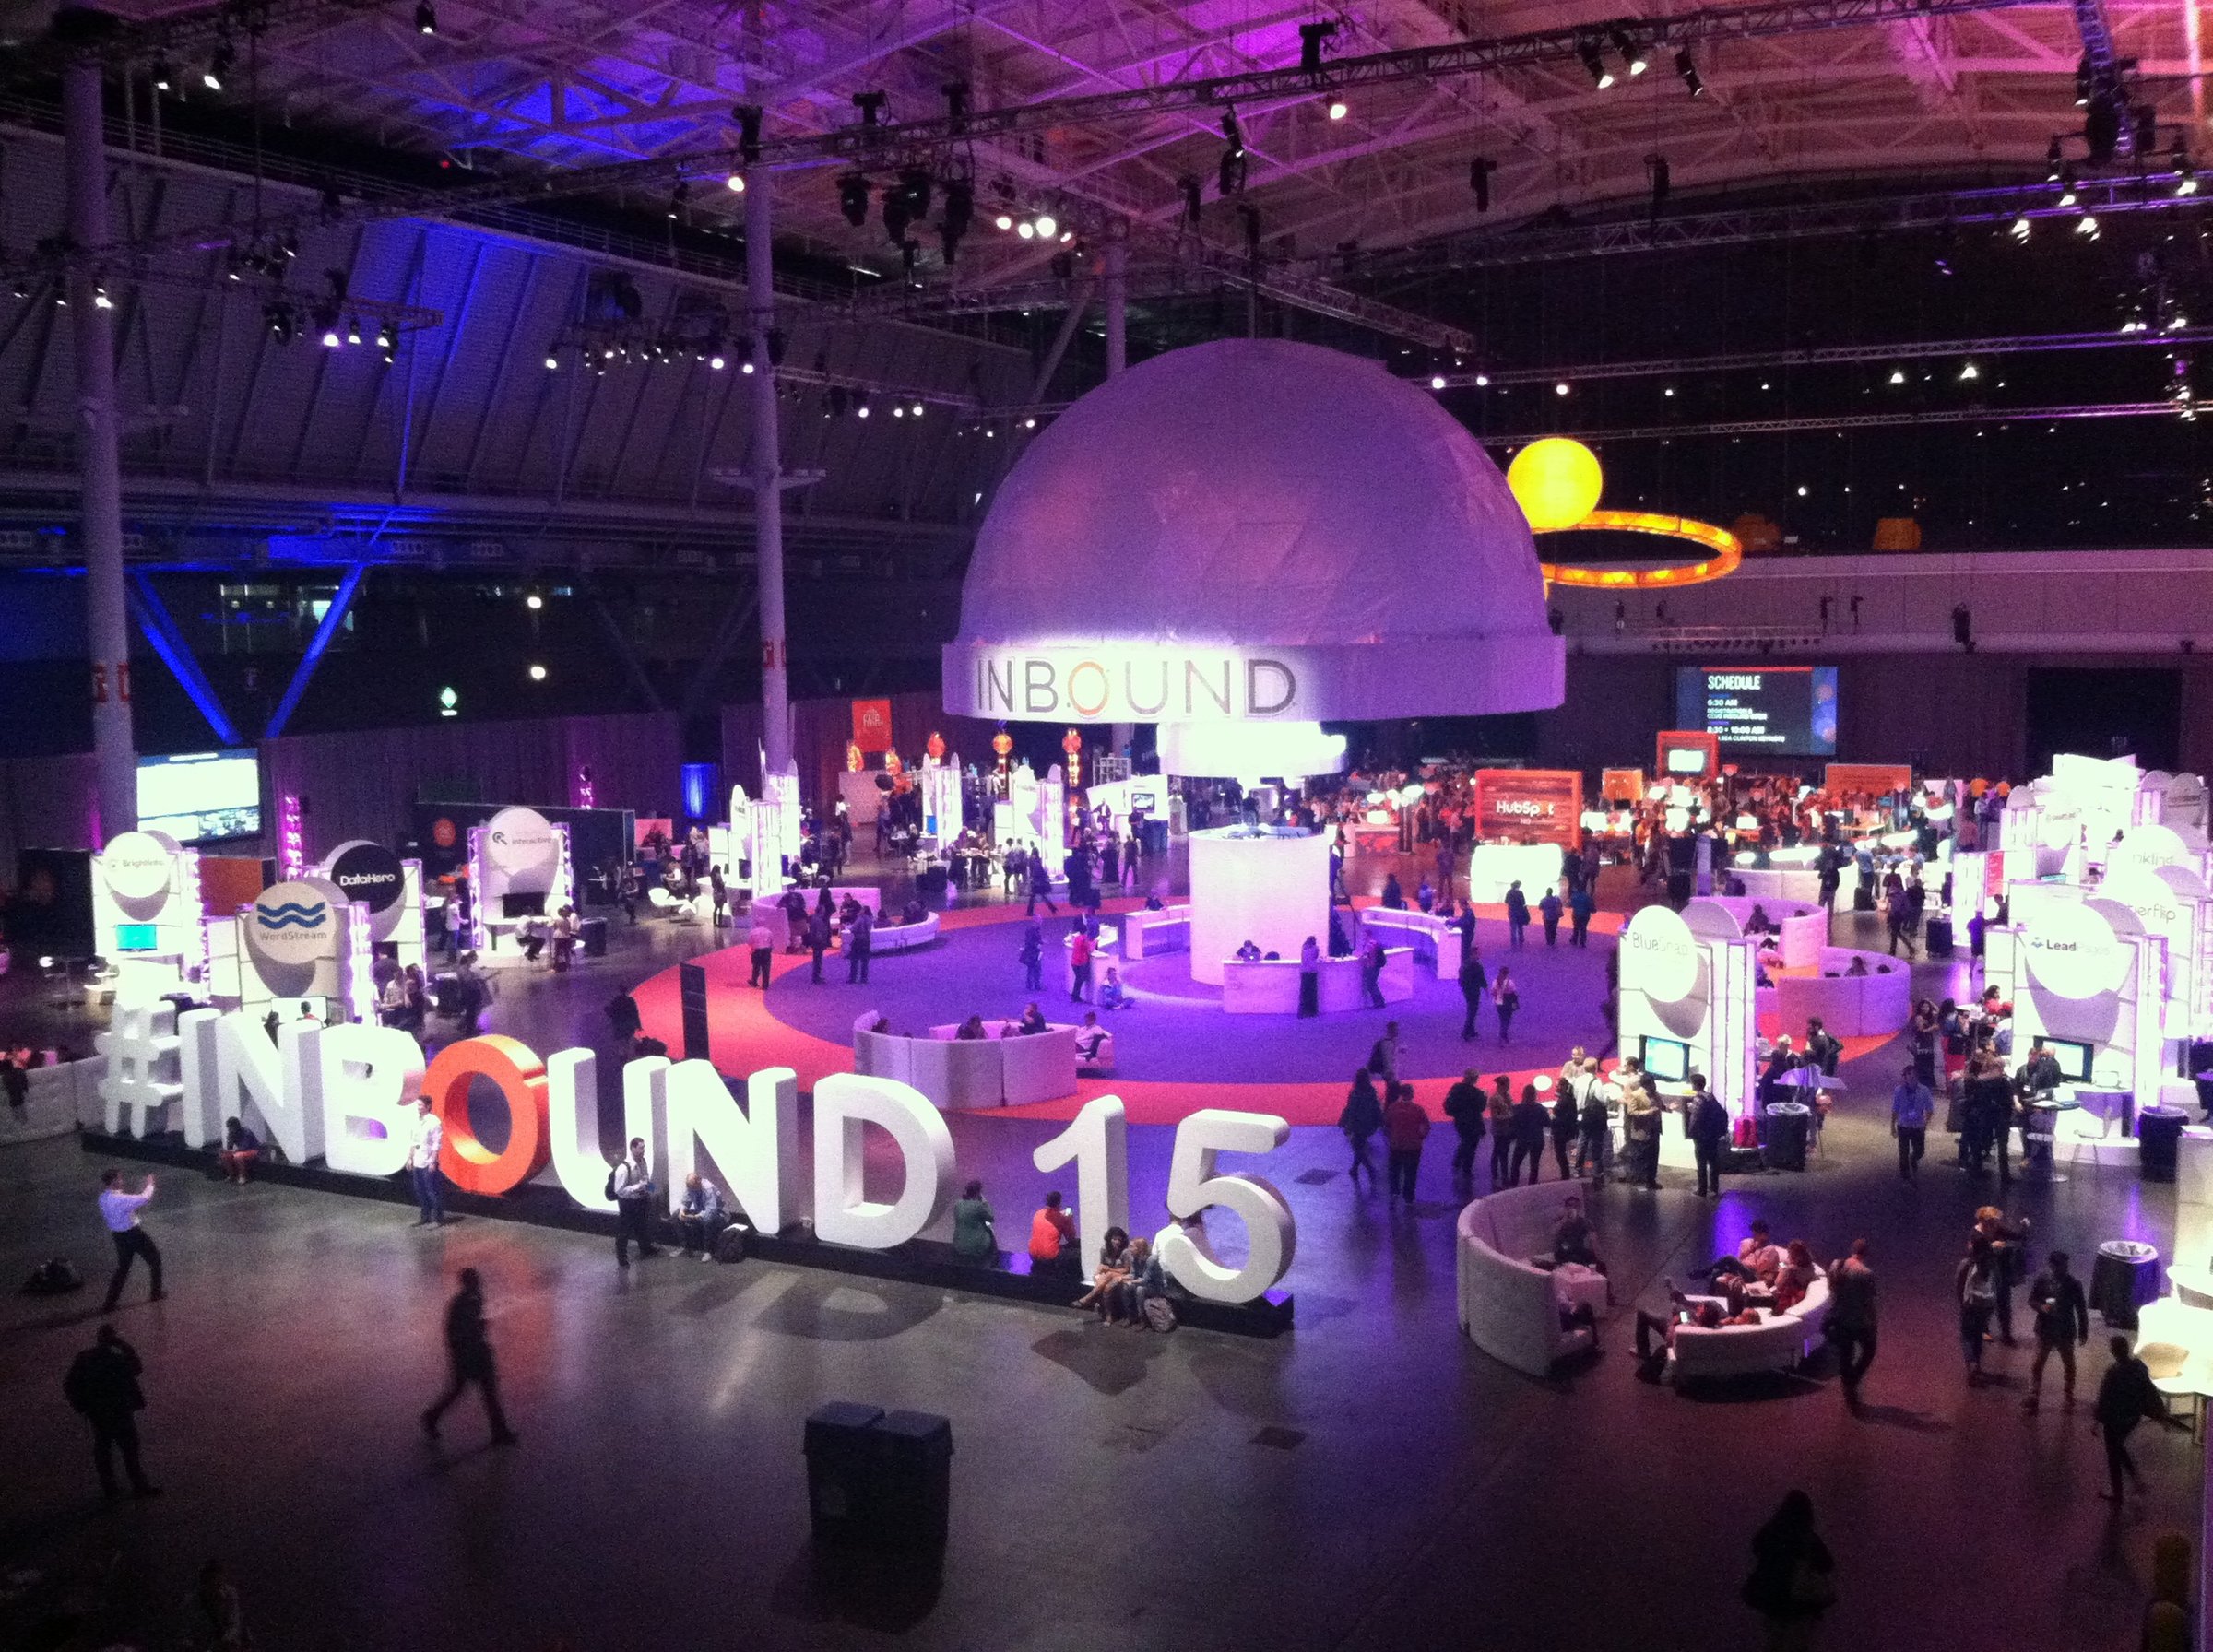 Best Practices from the Top 3 Inbound Conference Keynotes